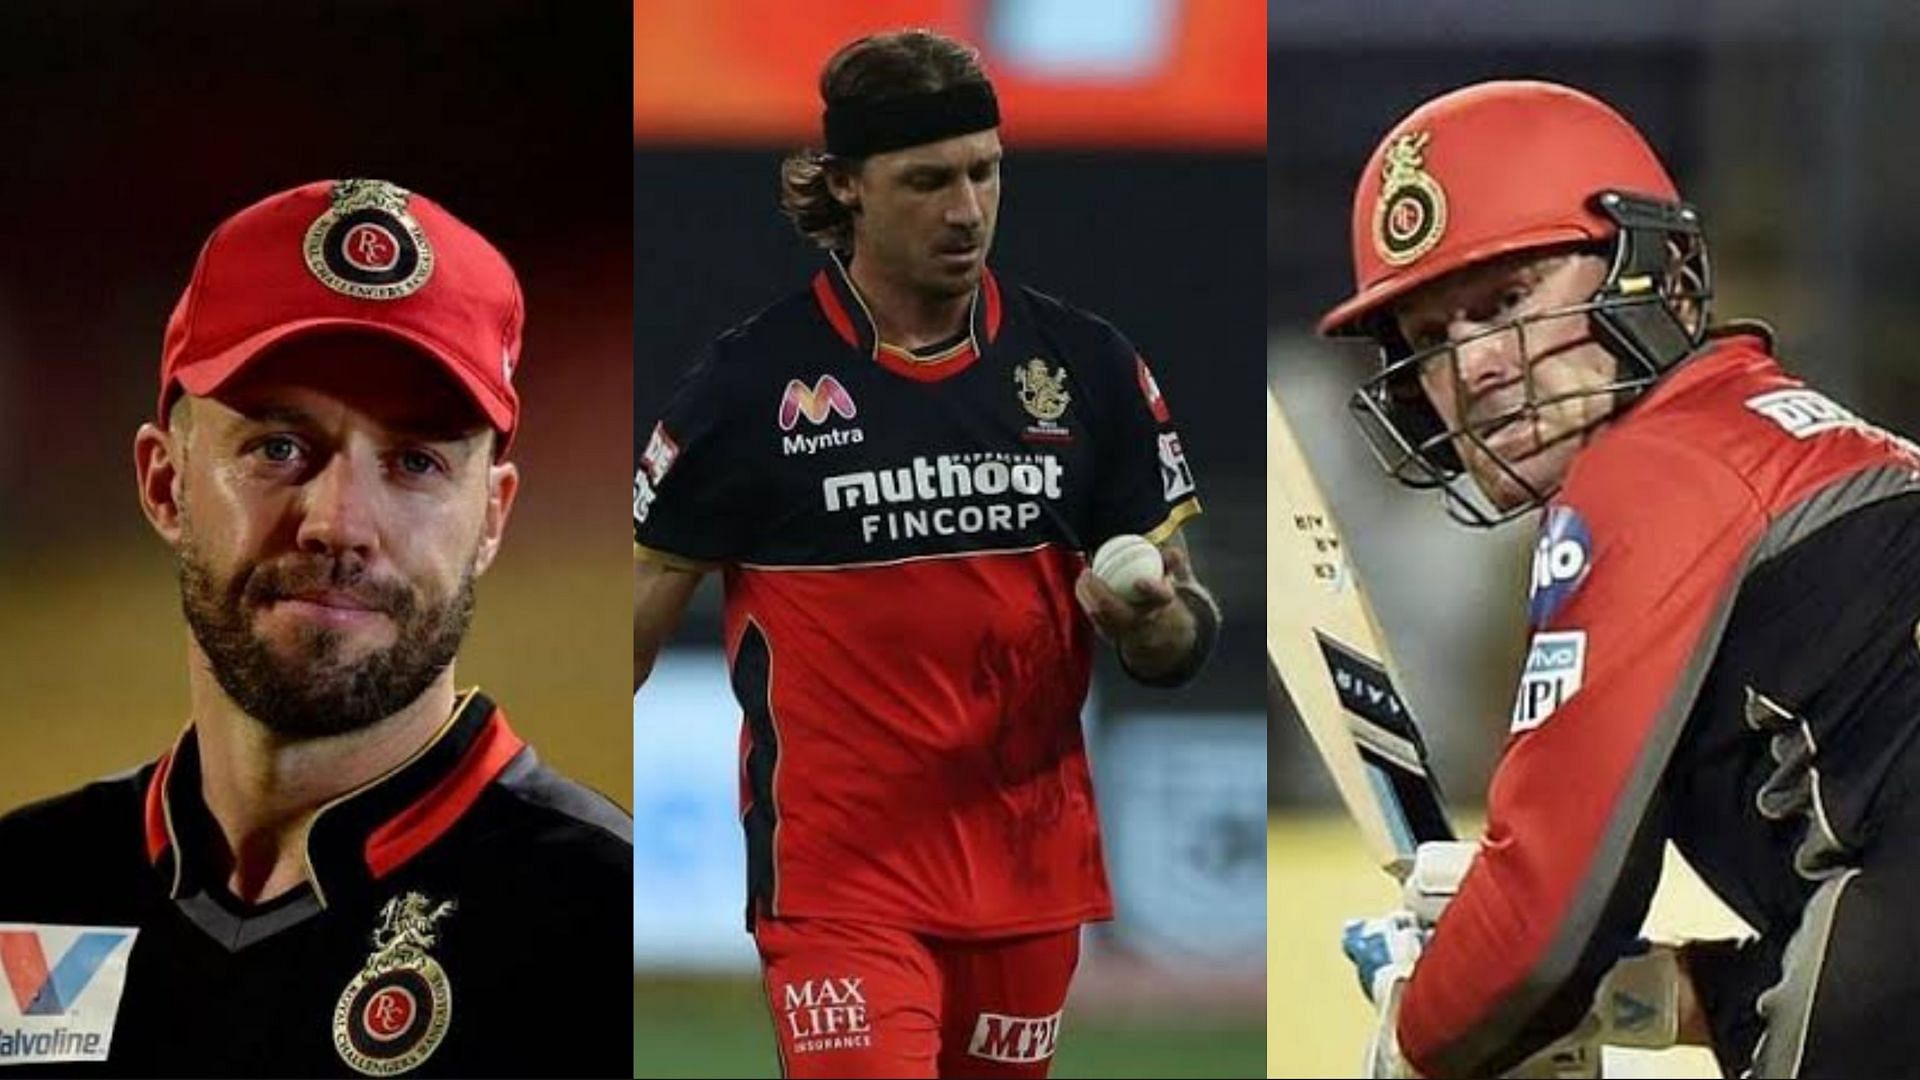 AB de Villiers, Dale Steyn, and Brendon McCullum played their last IPL games for RCB